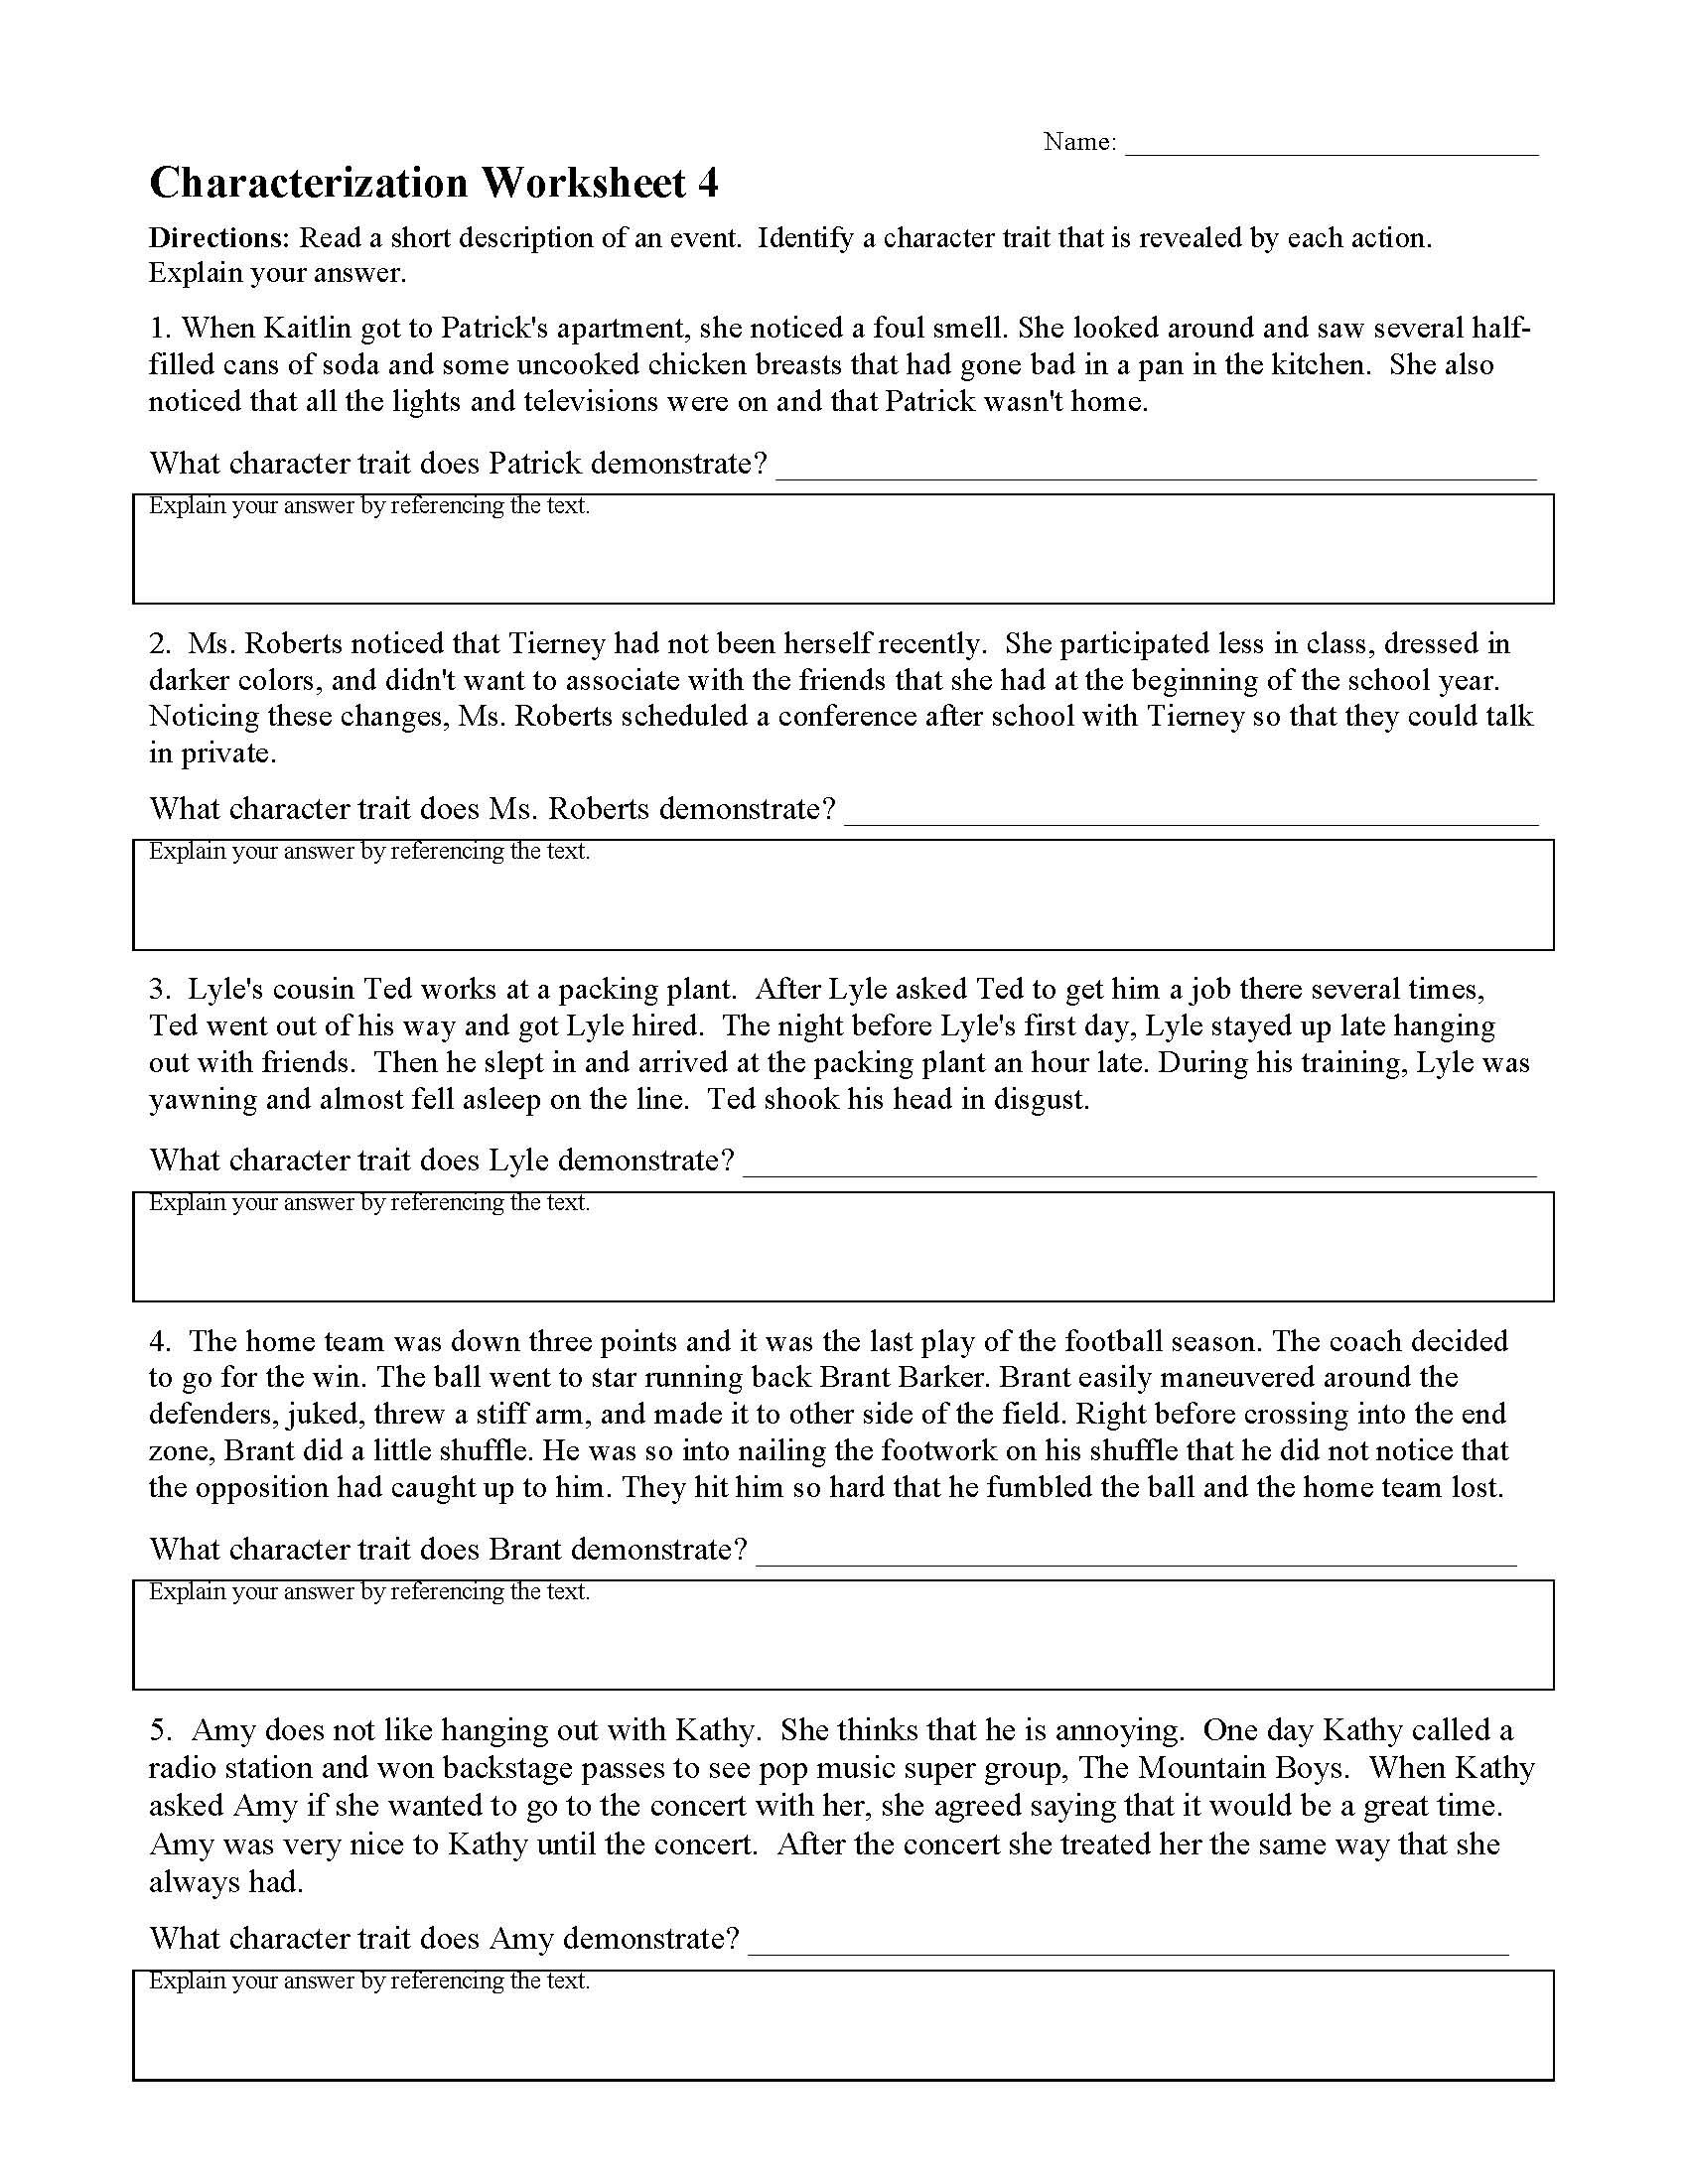 Characterization Worksheet 4 | Preview